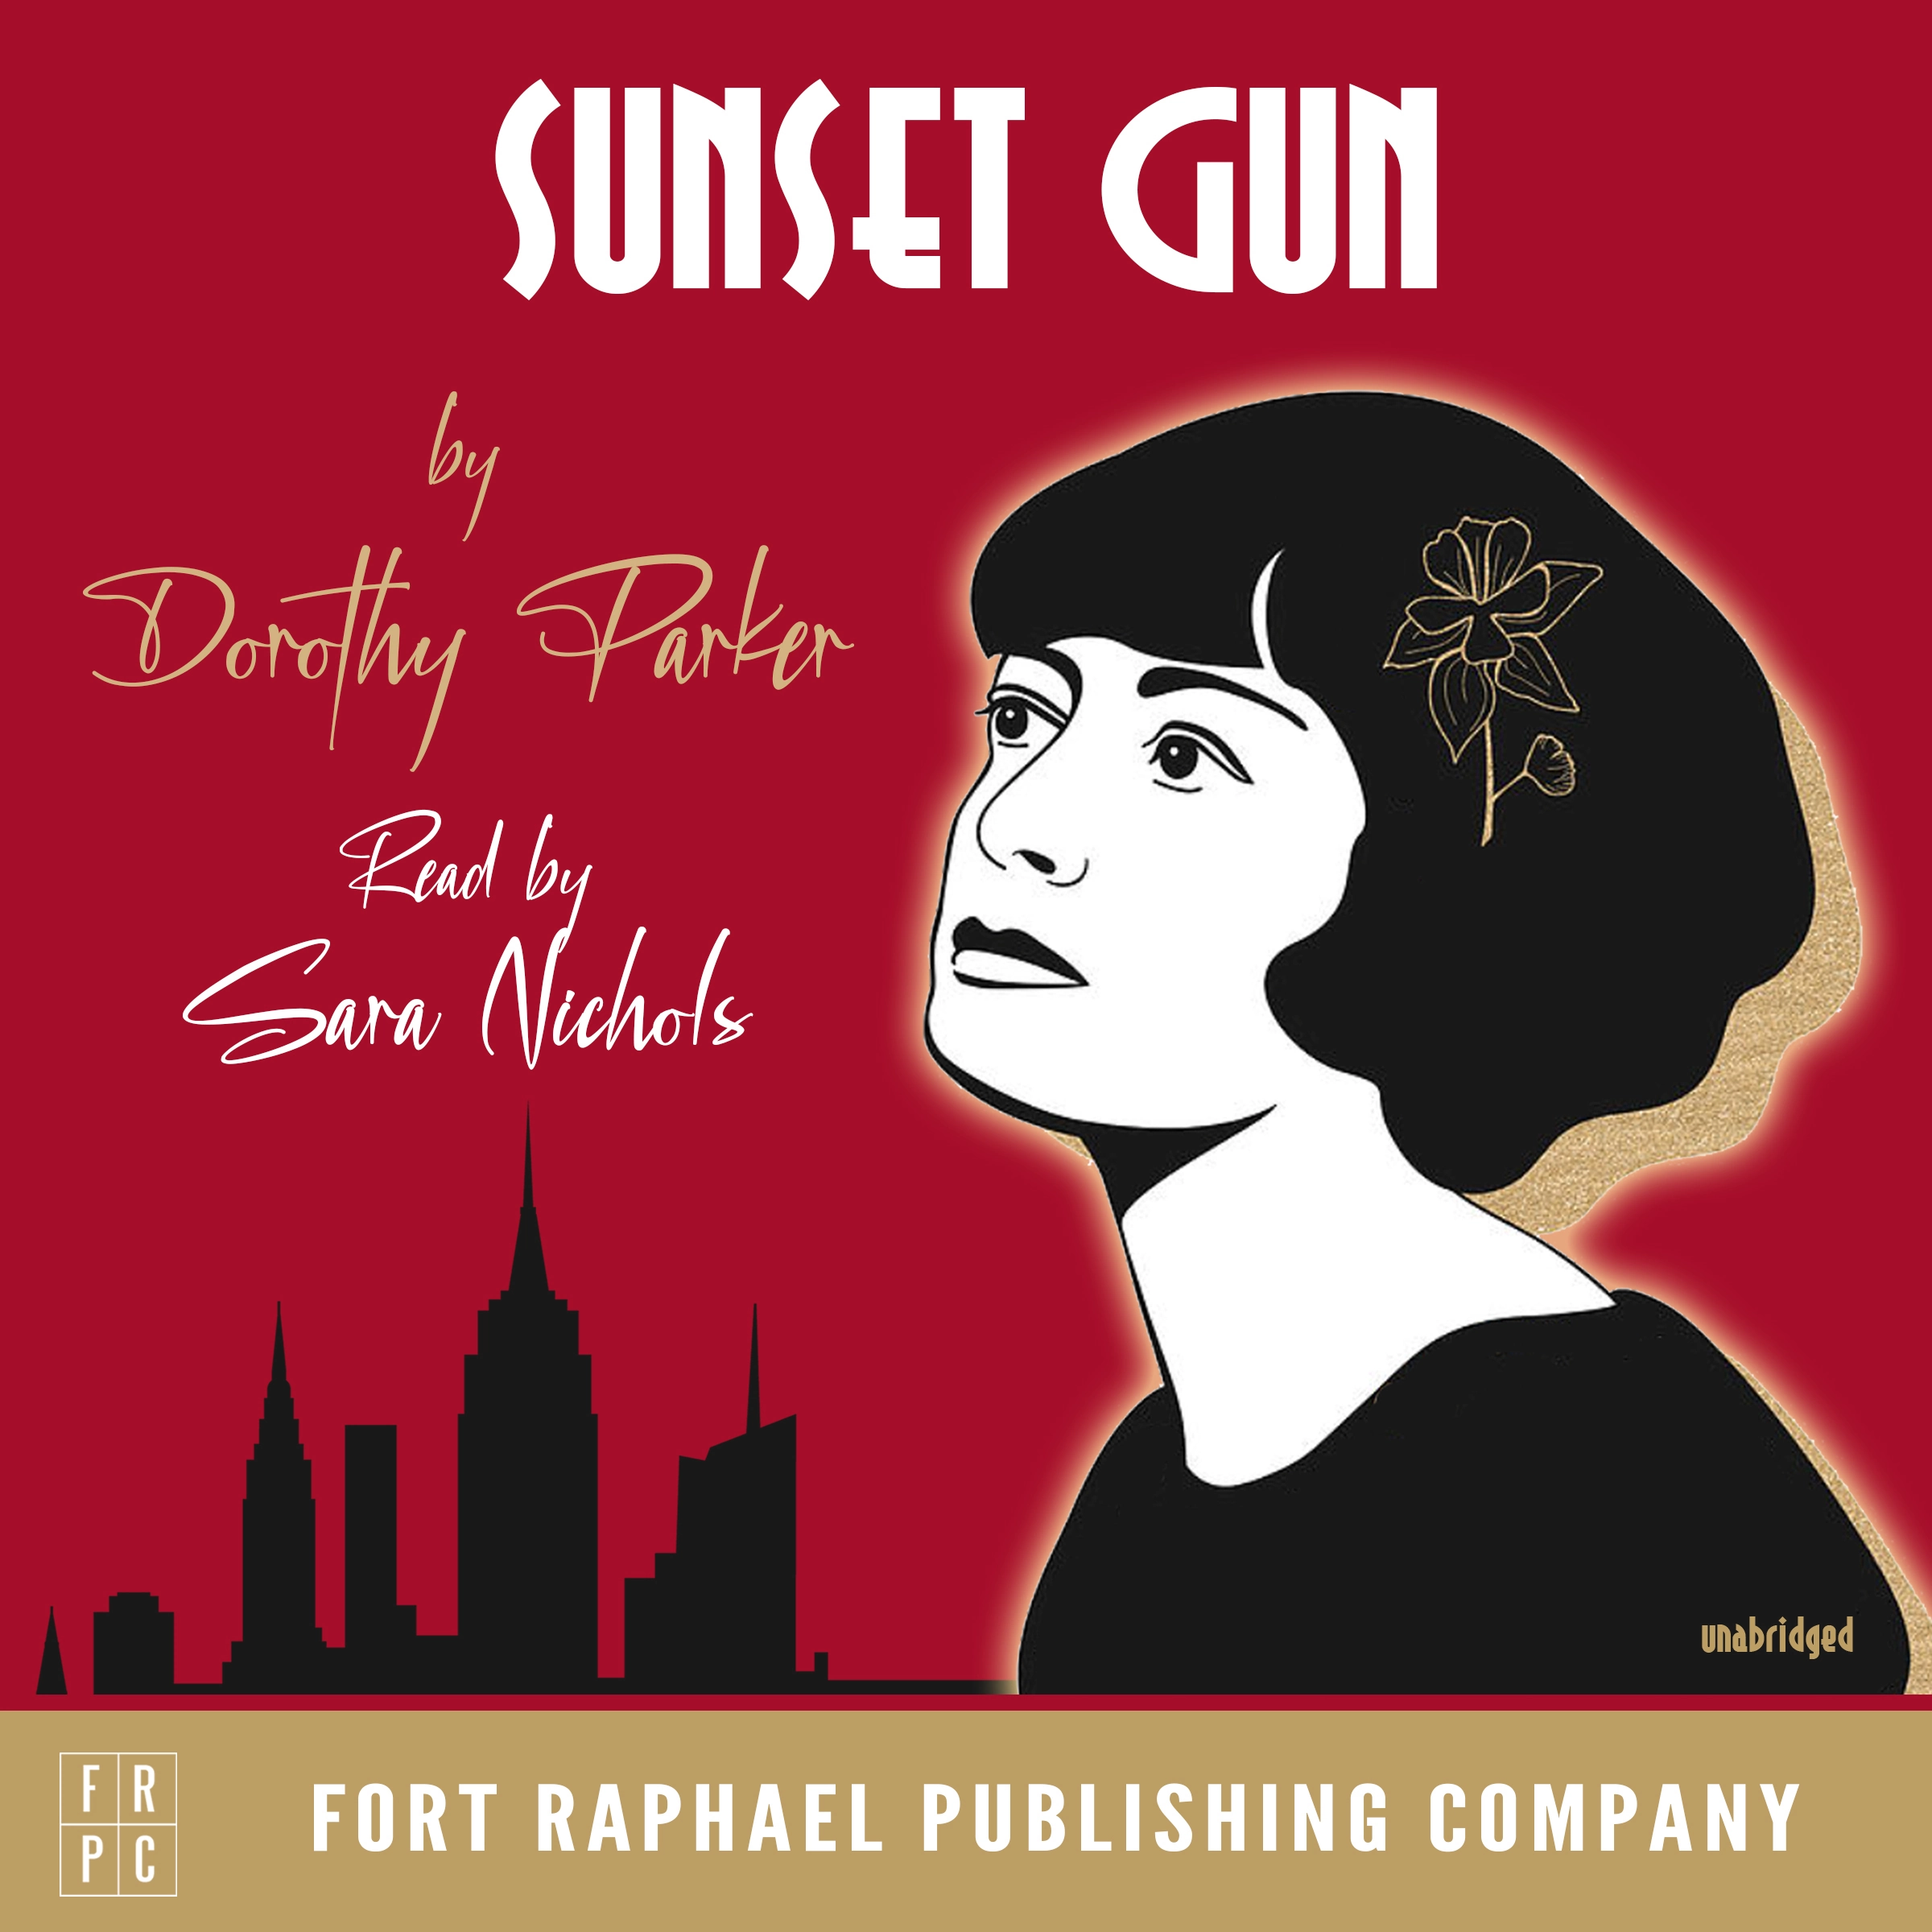 Sunset Gun - Poems by Dorothy Parker - Unabridged Audiobook by Dorothy Parker